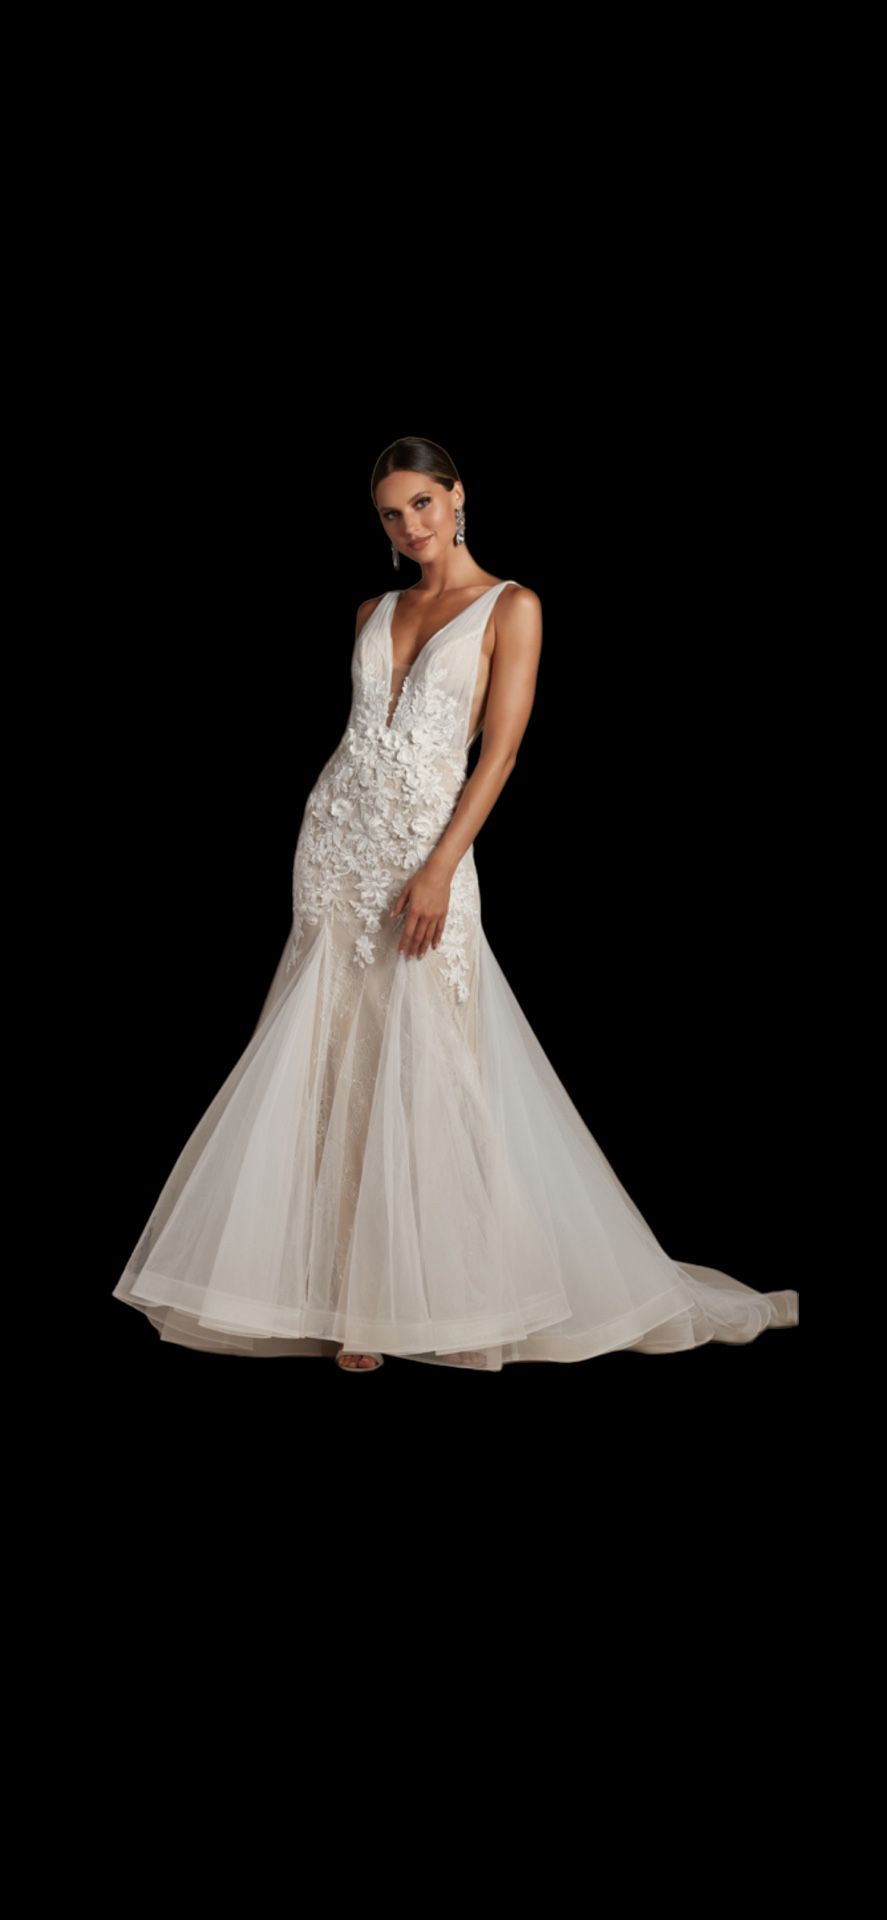 New With Tags Wedding Gown & Wedding Dress $385